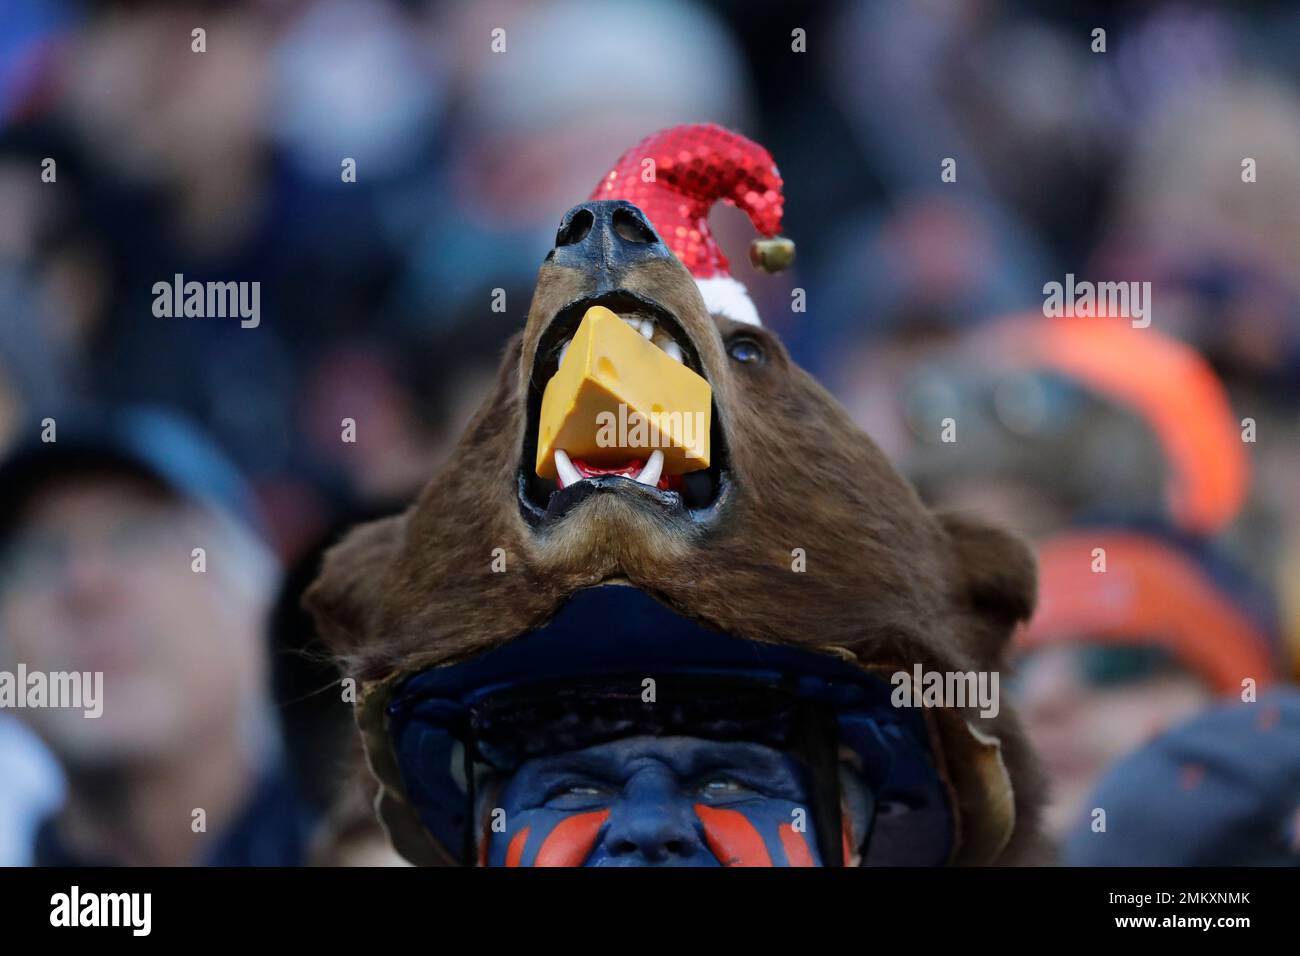 A Chicago Bears fan wears a bear hat during the second half of an